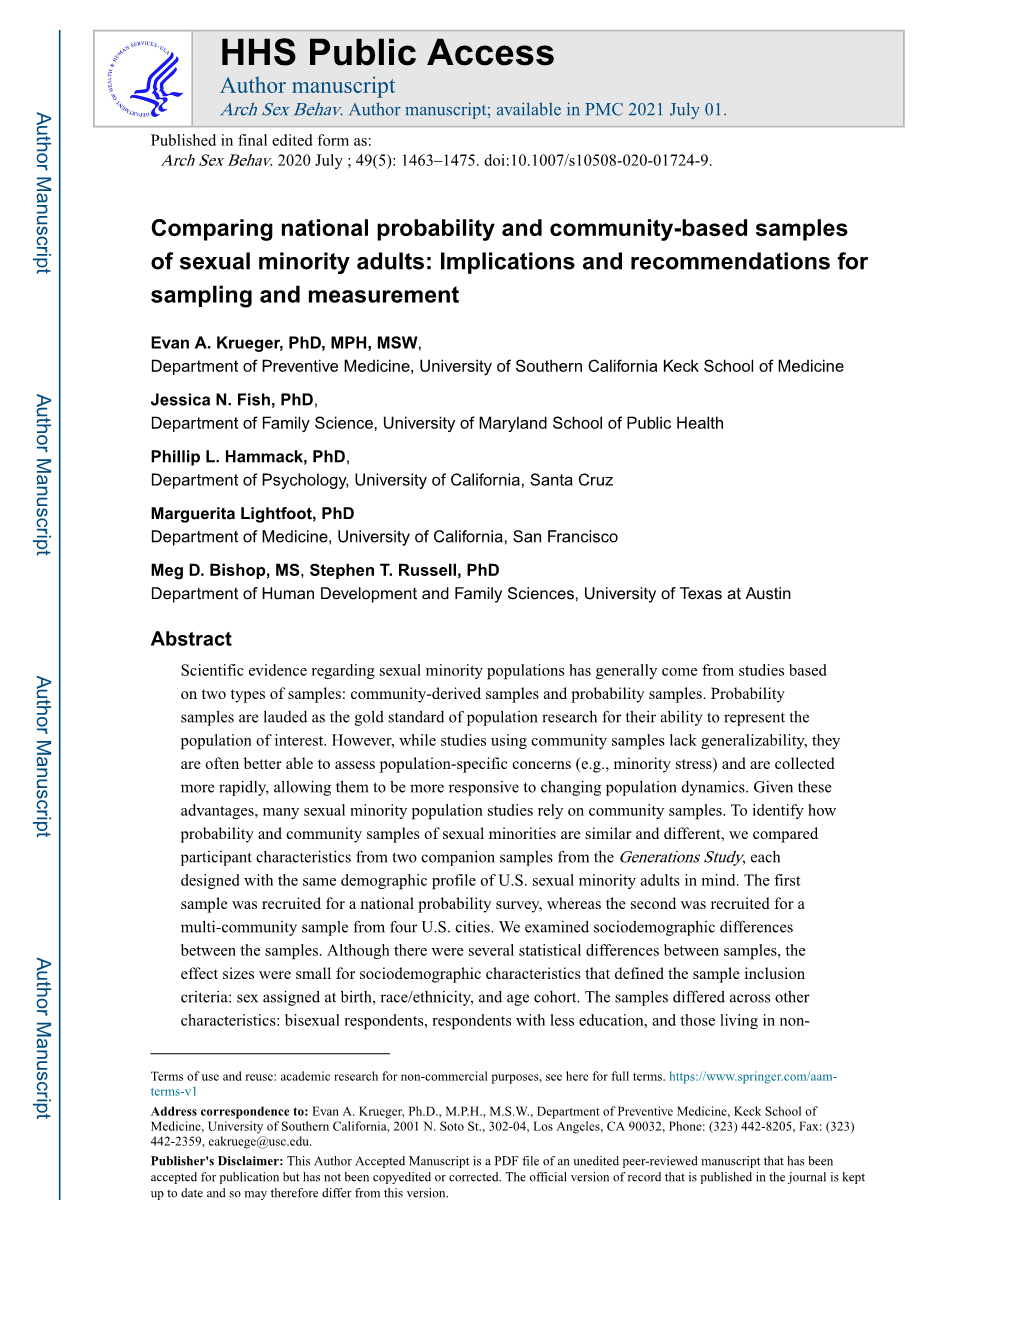 Comparing National Probability and Community-Based Samples of Sexual Minority Adults: Implications and Recommendations for Sampling and Measurement